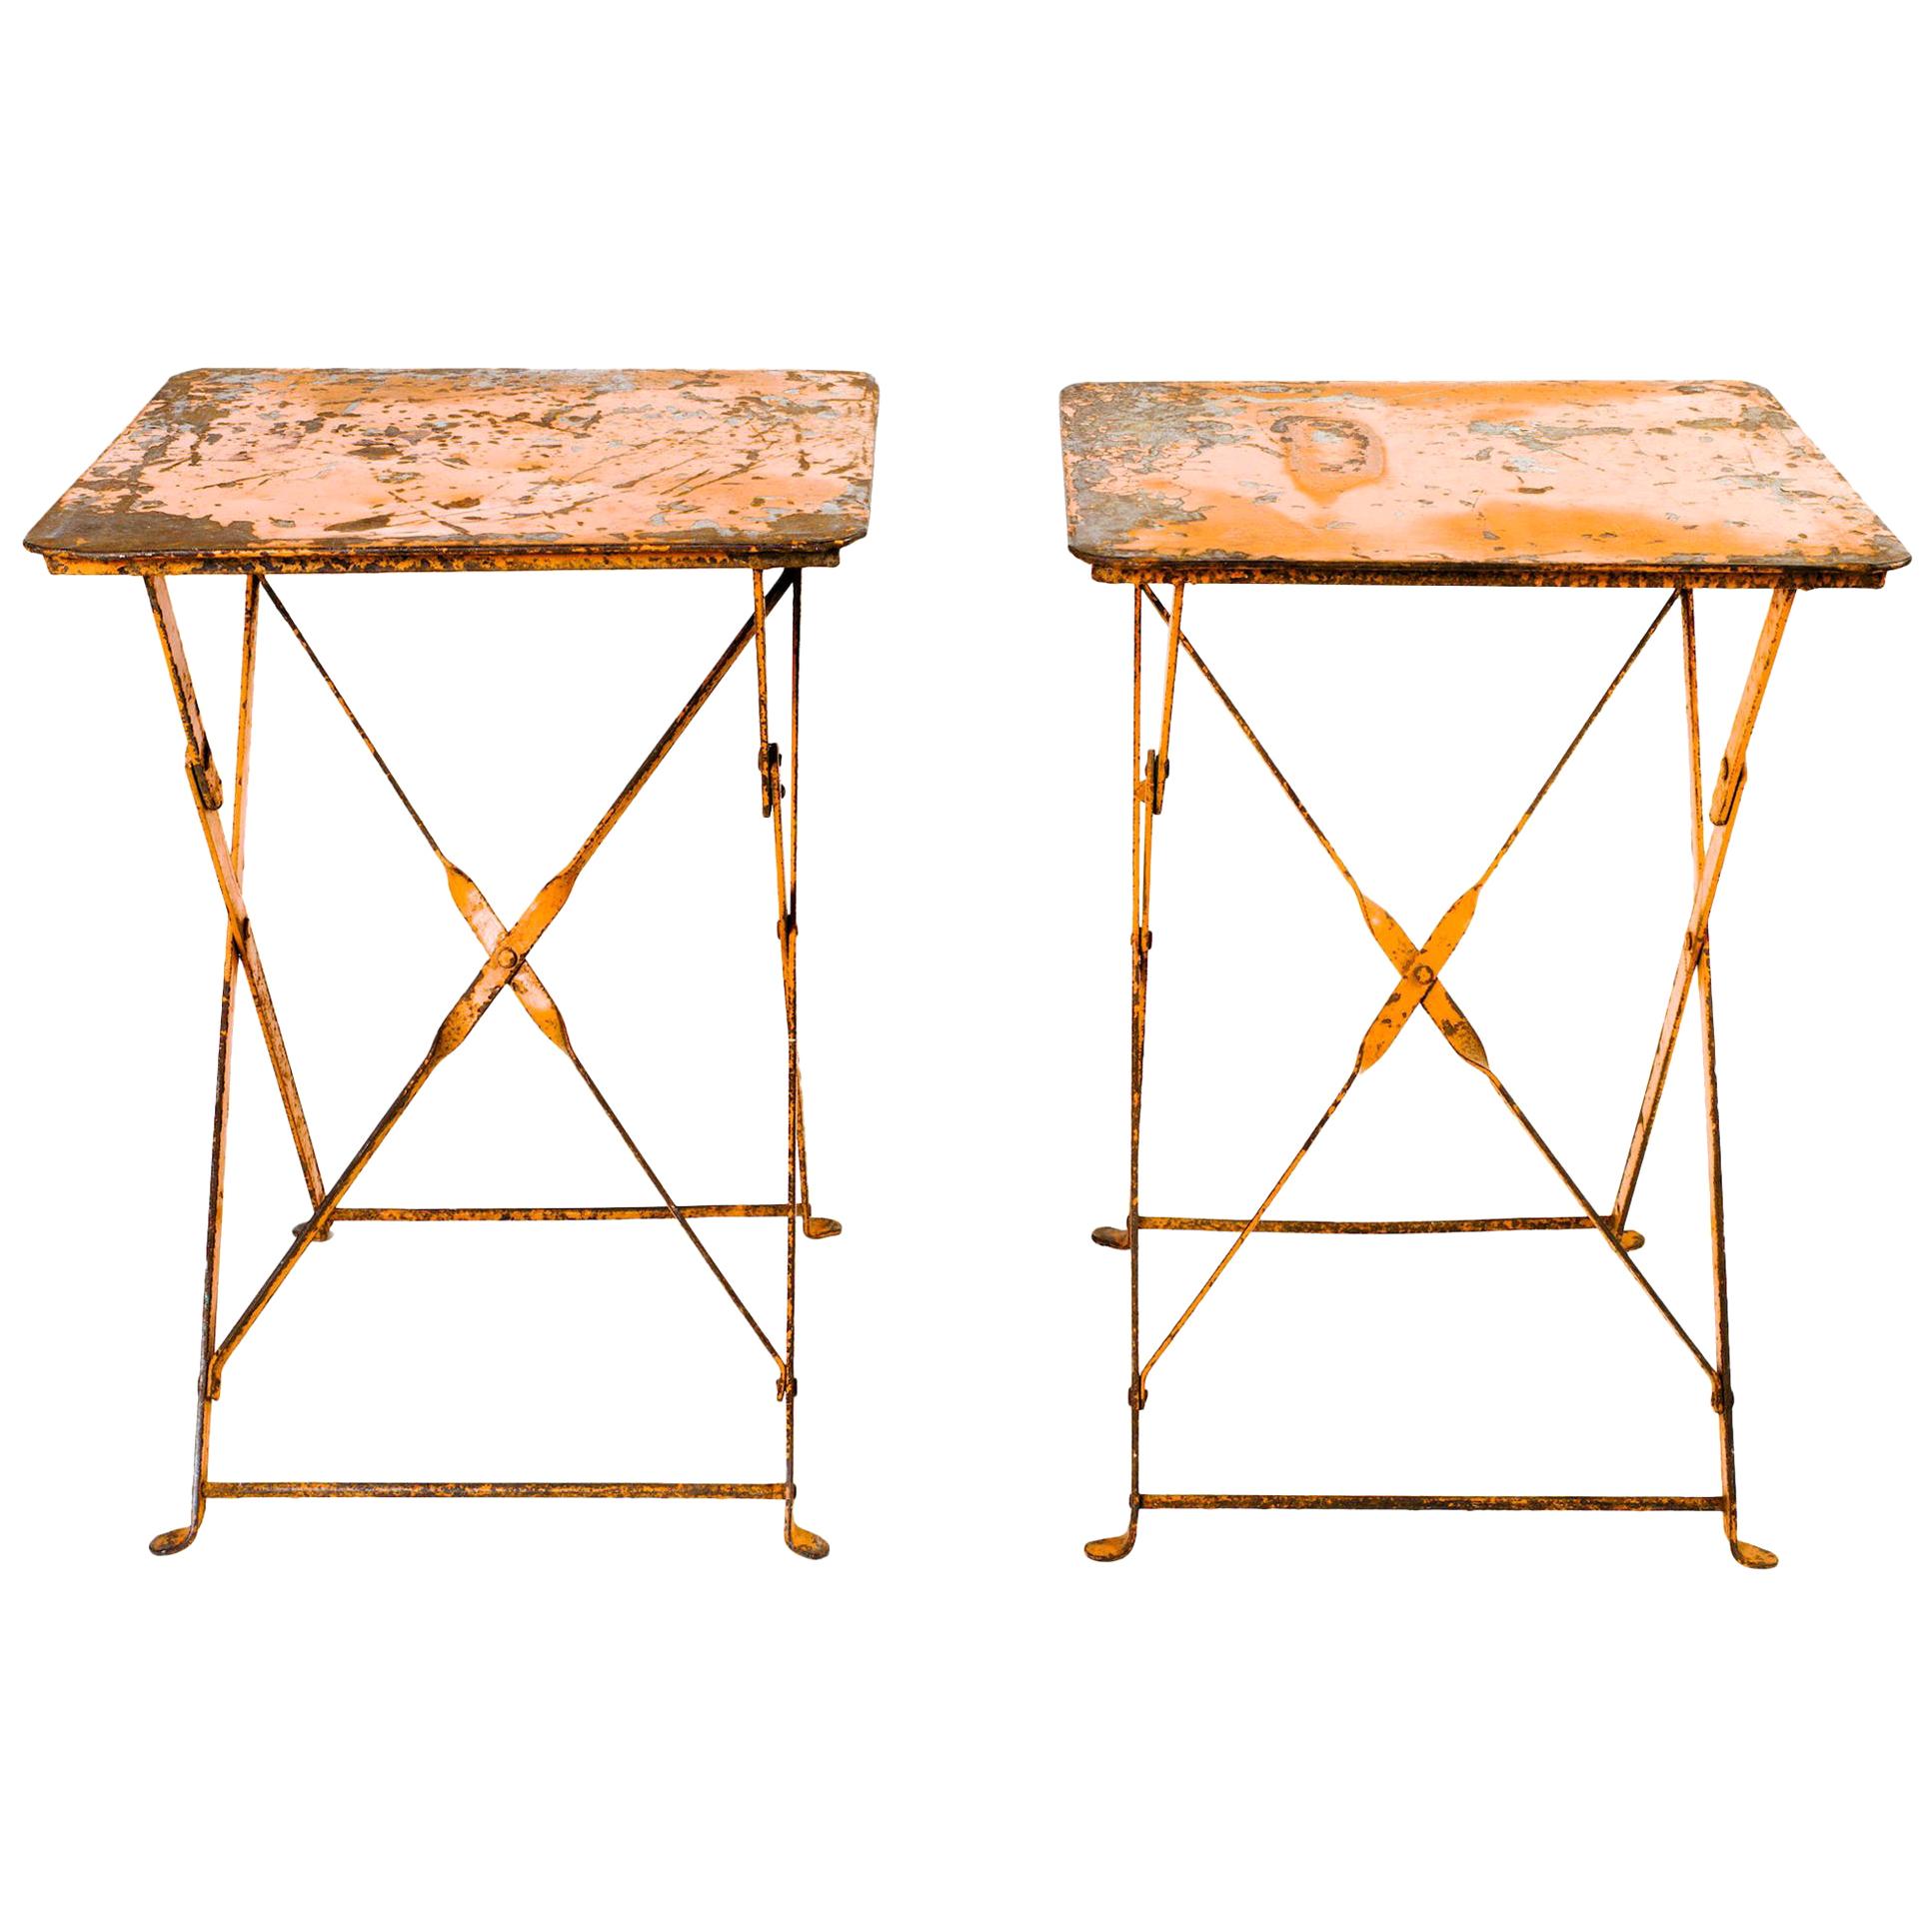 Pair of French Antique Bistro Folding Tables in Distressed Orange Metal, c. 1930